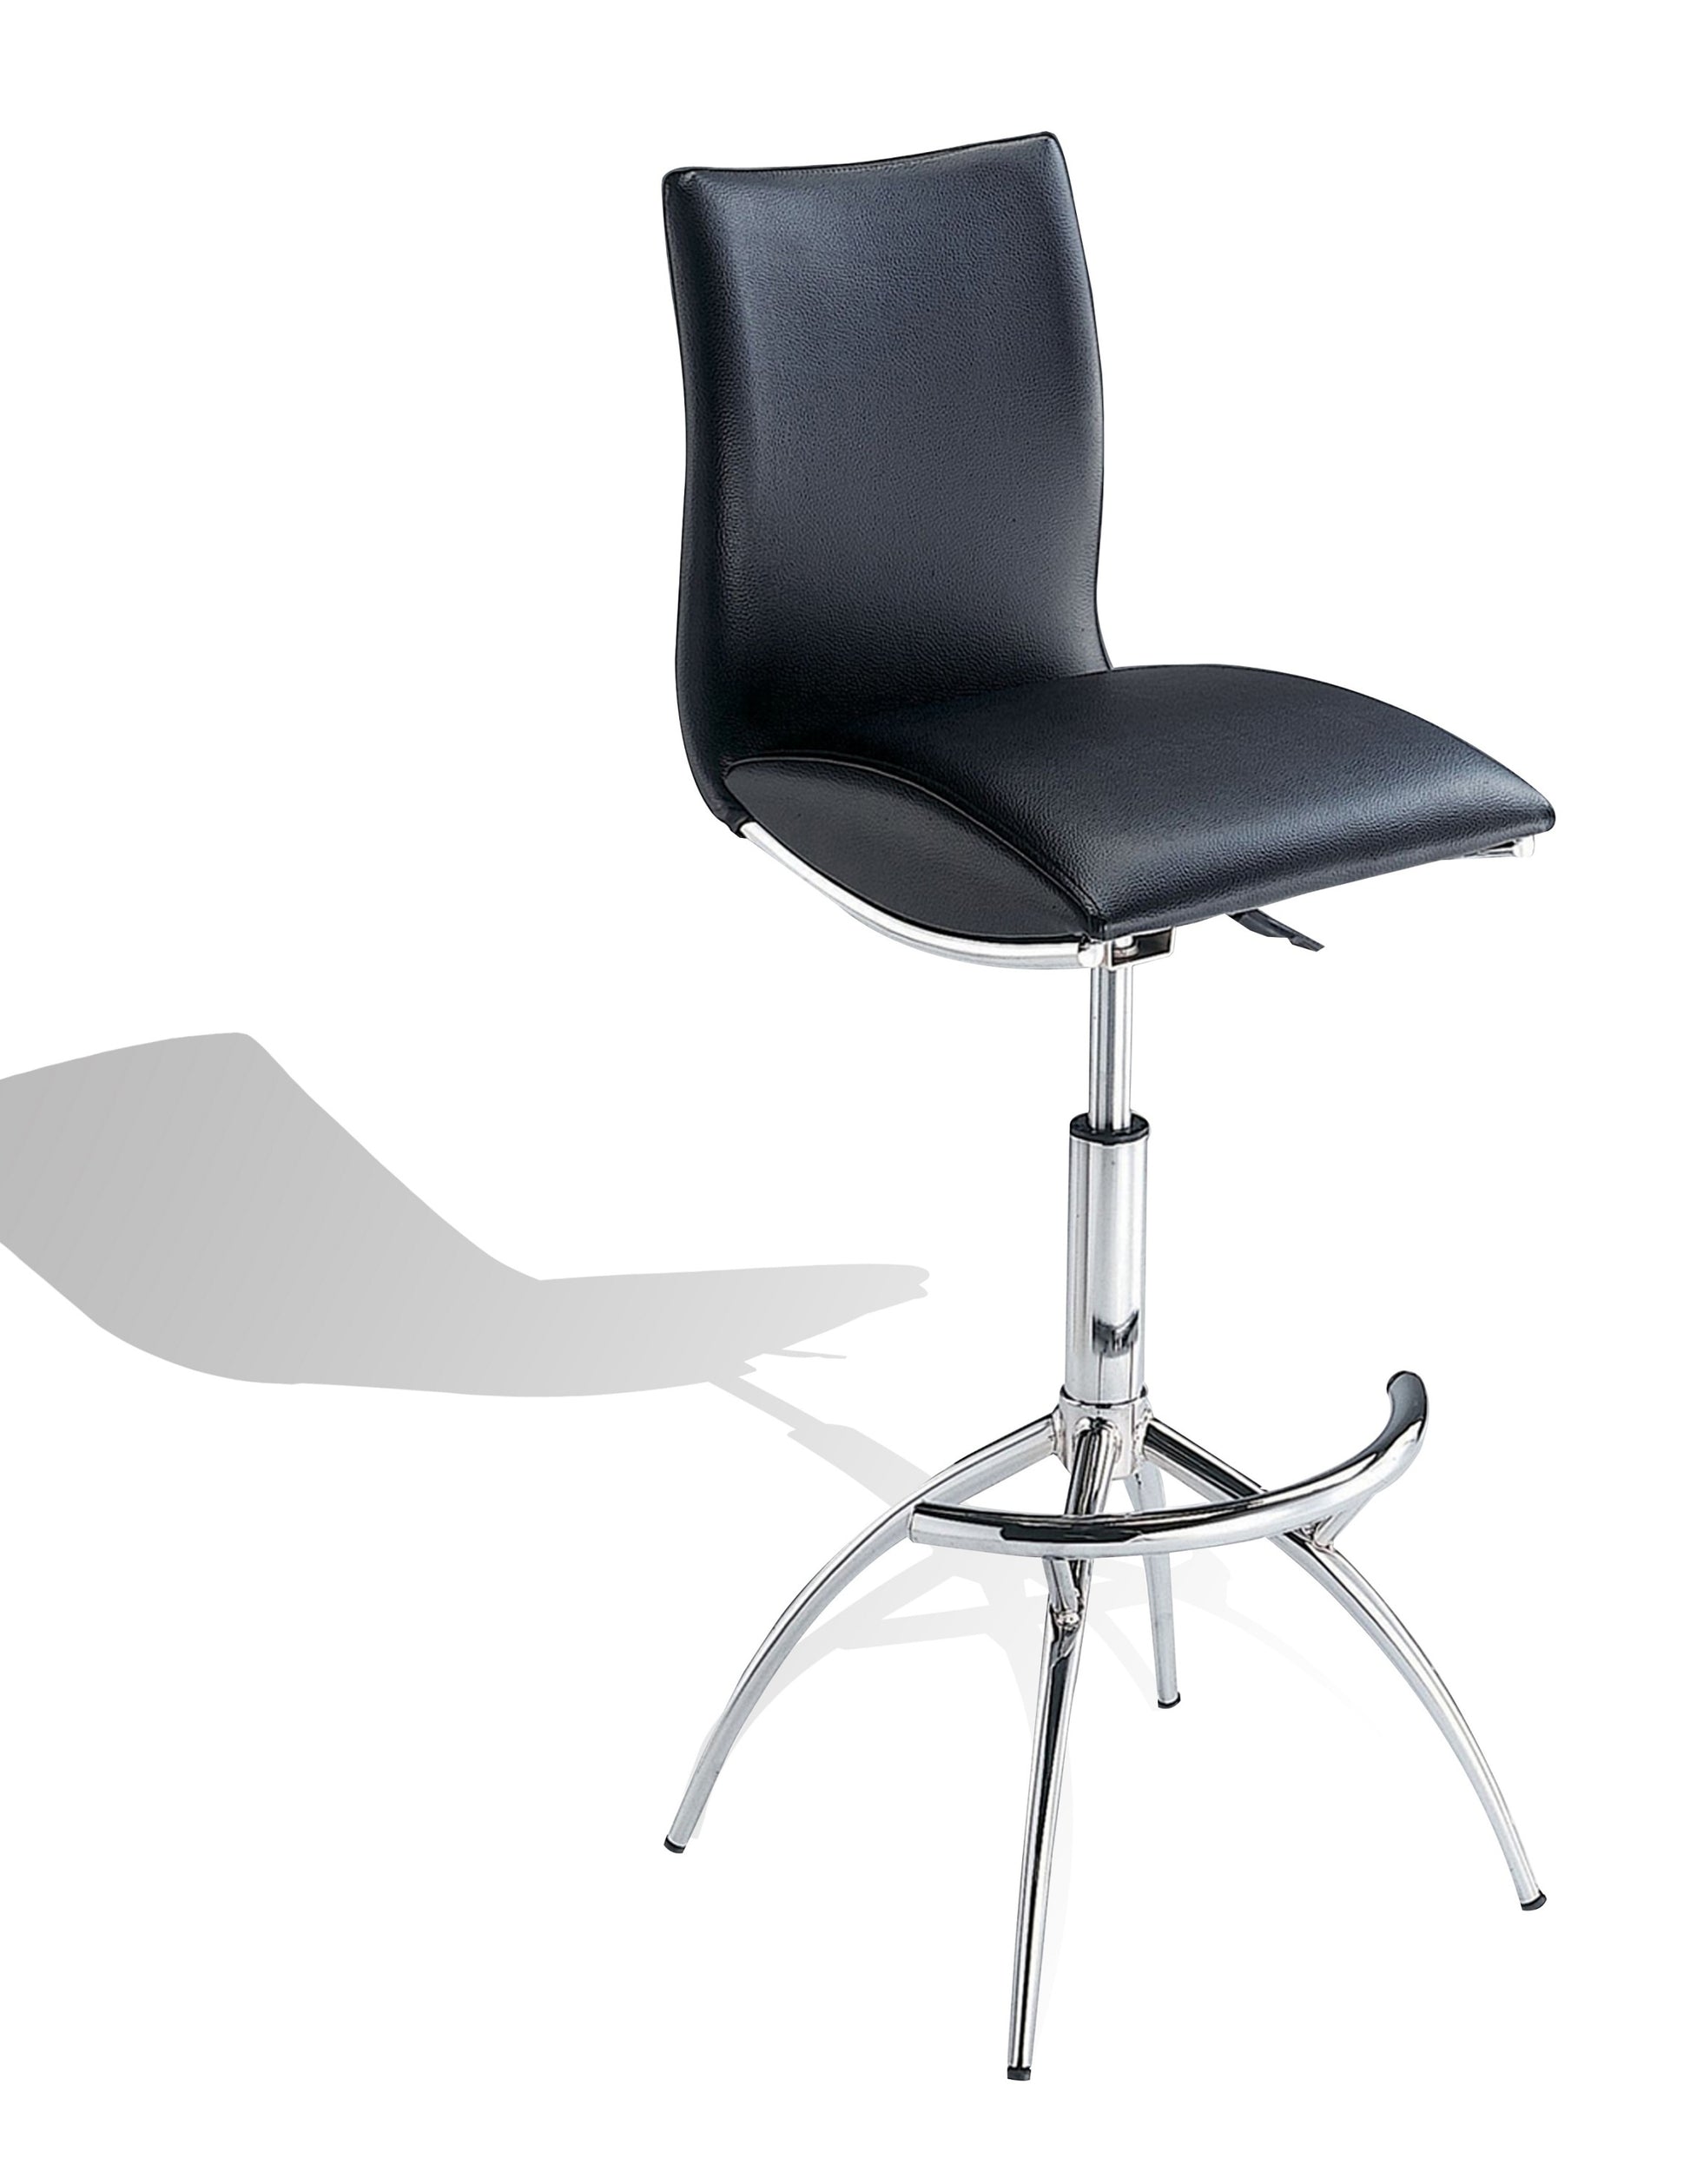 Modern Barstool Leatherette/Chrome Adjustable Height In Black Color - Enova Luxe Home Store